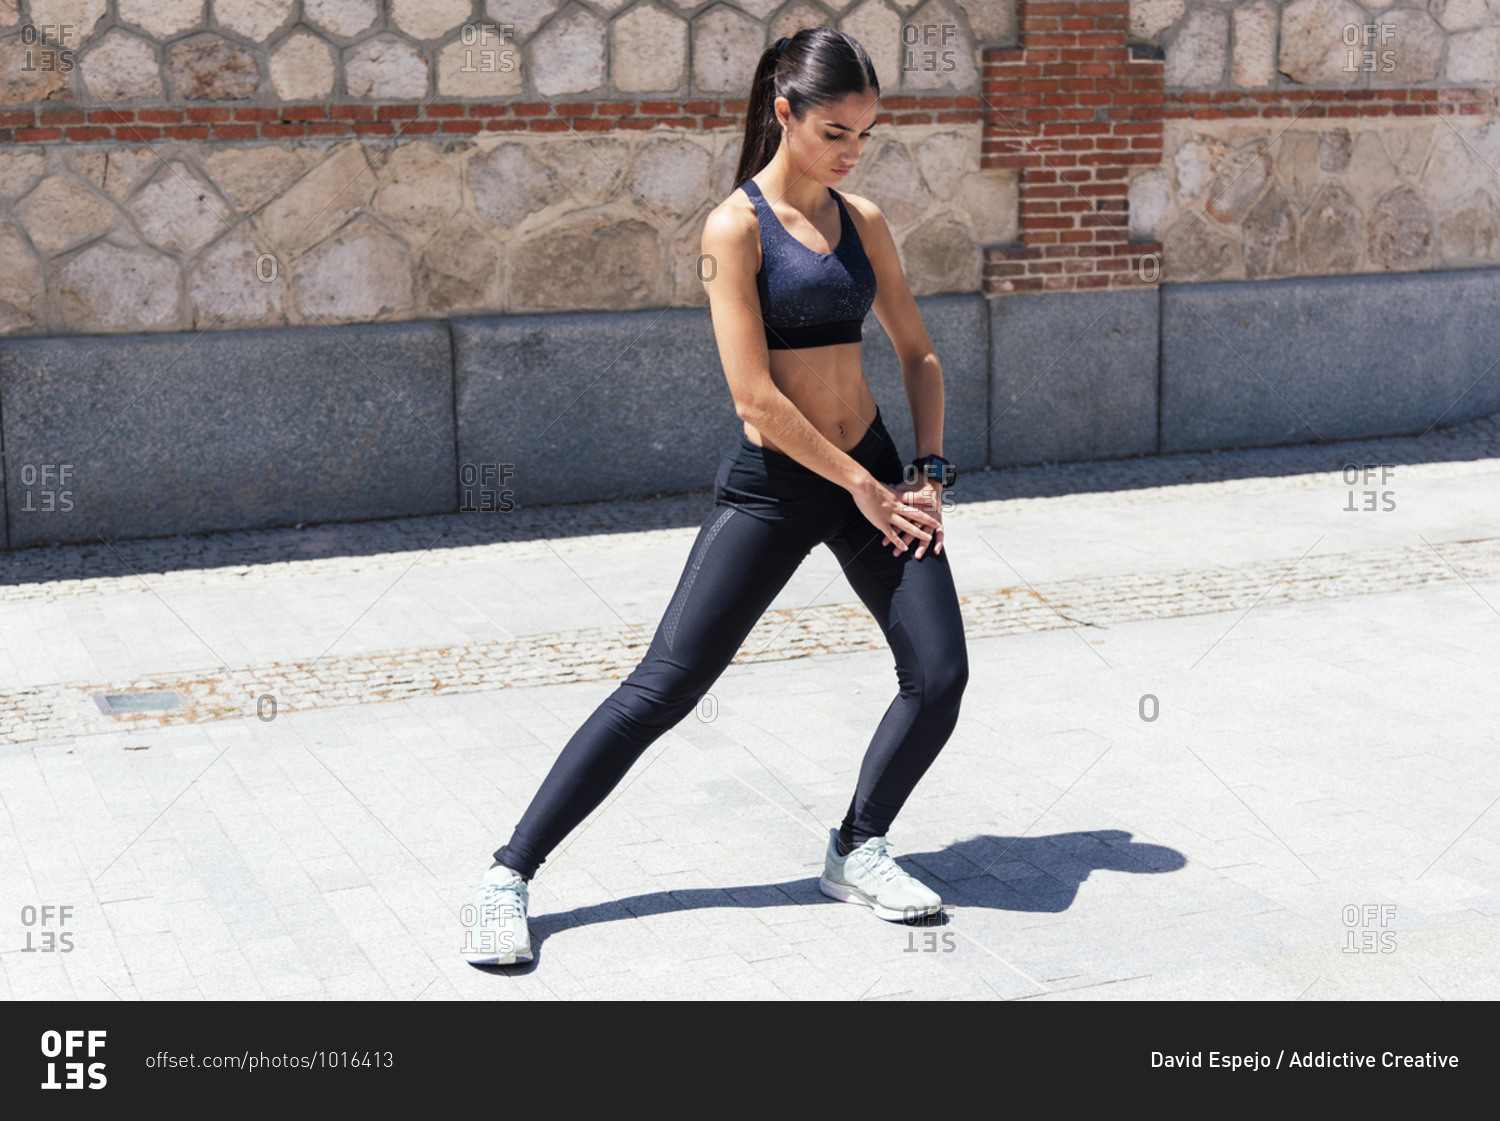 Full body of slim young female athlete in sportswear doing side lunges while stretching legs before running on street